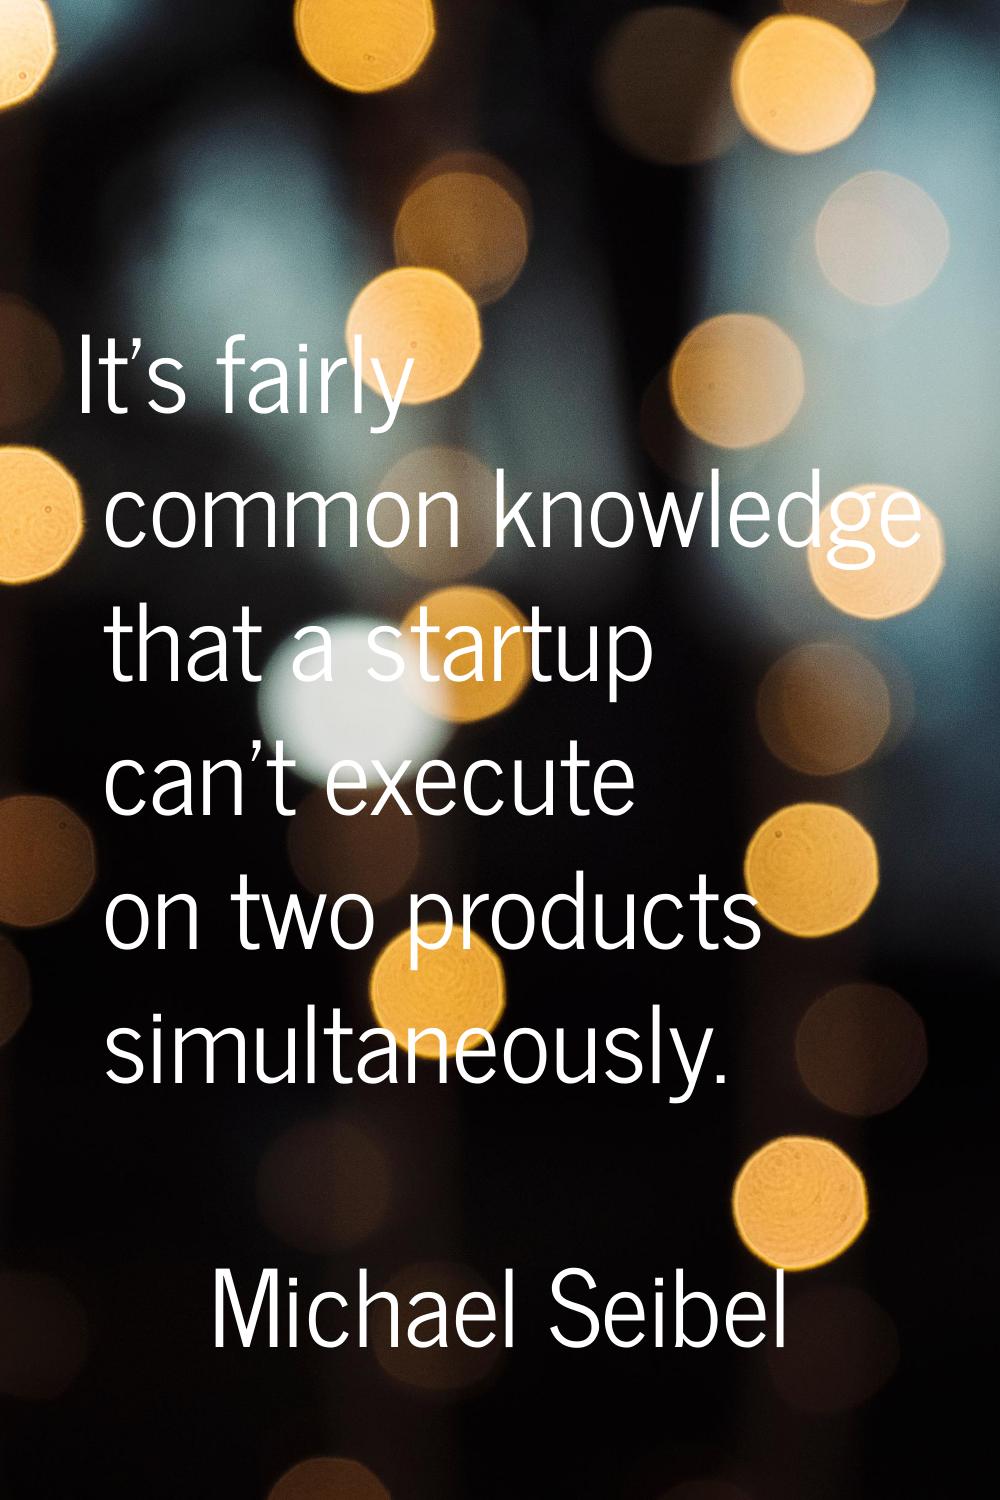 It's fairly common knowledge that a startup can't execute on two products simultaneously.